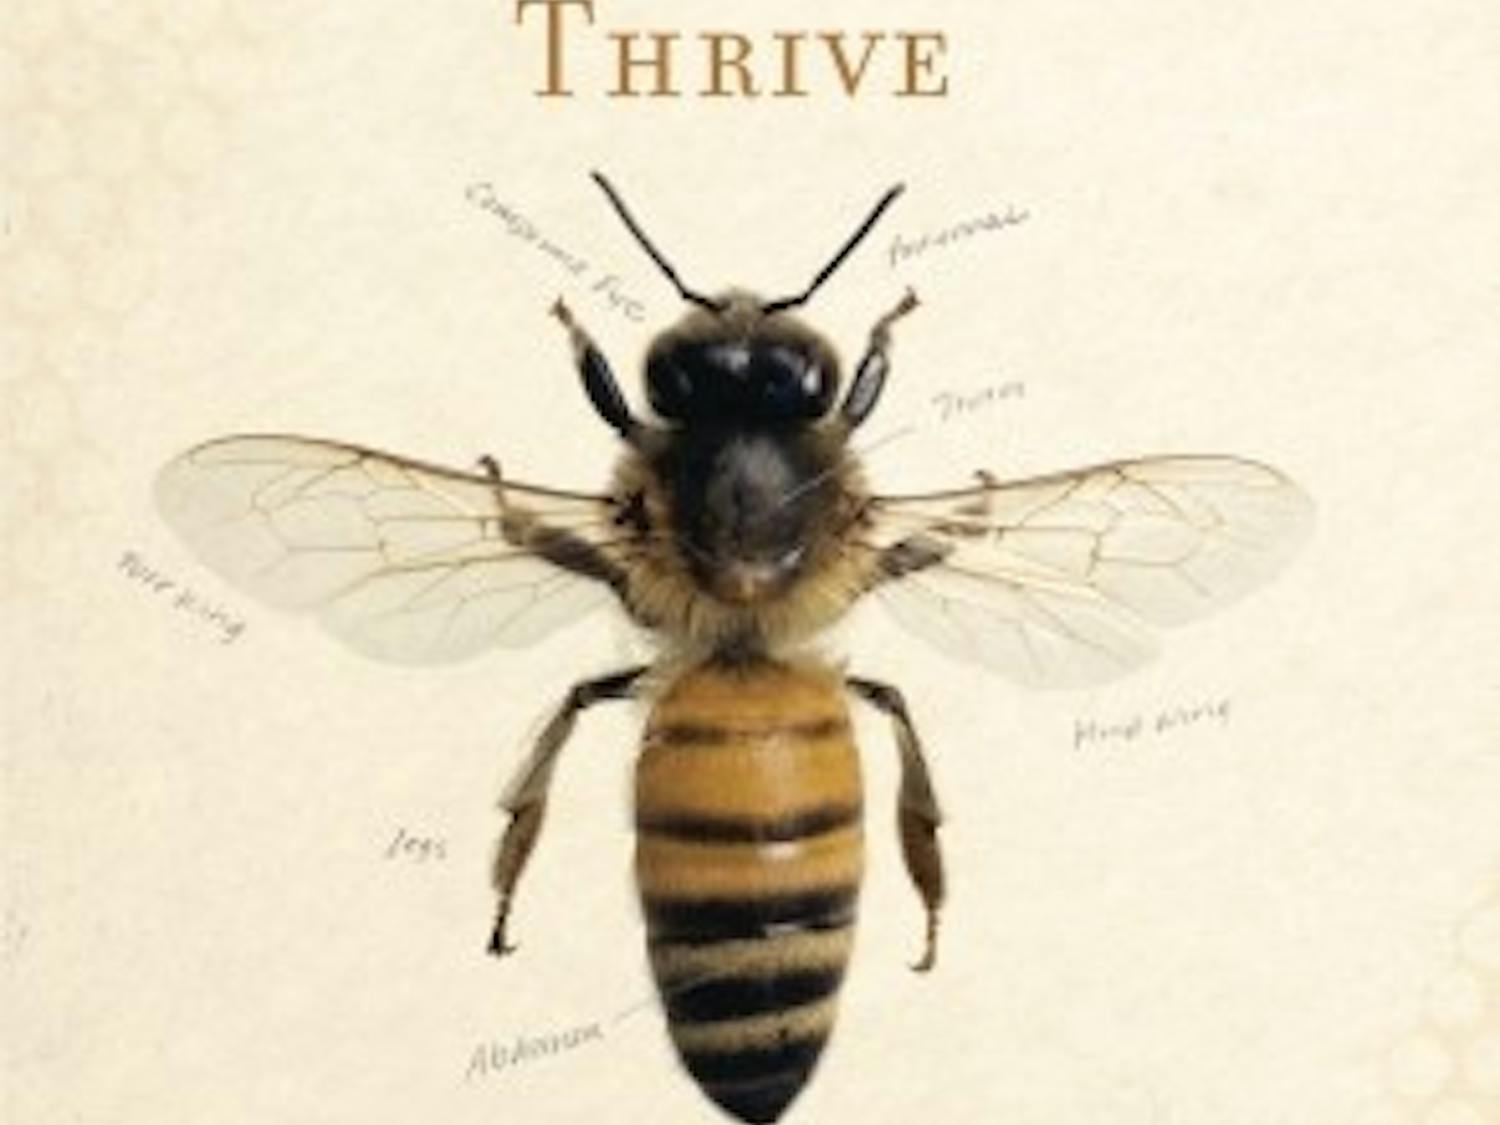 Swan defends the honeybee’s legitimacy against public indifference, but that doesn’t detract from the power of her new book.